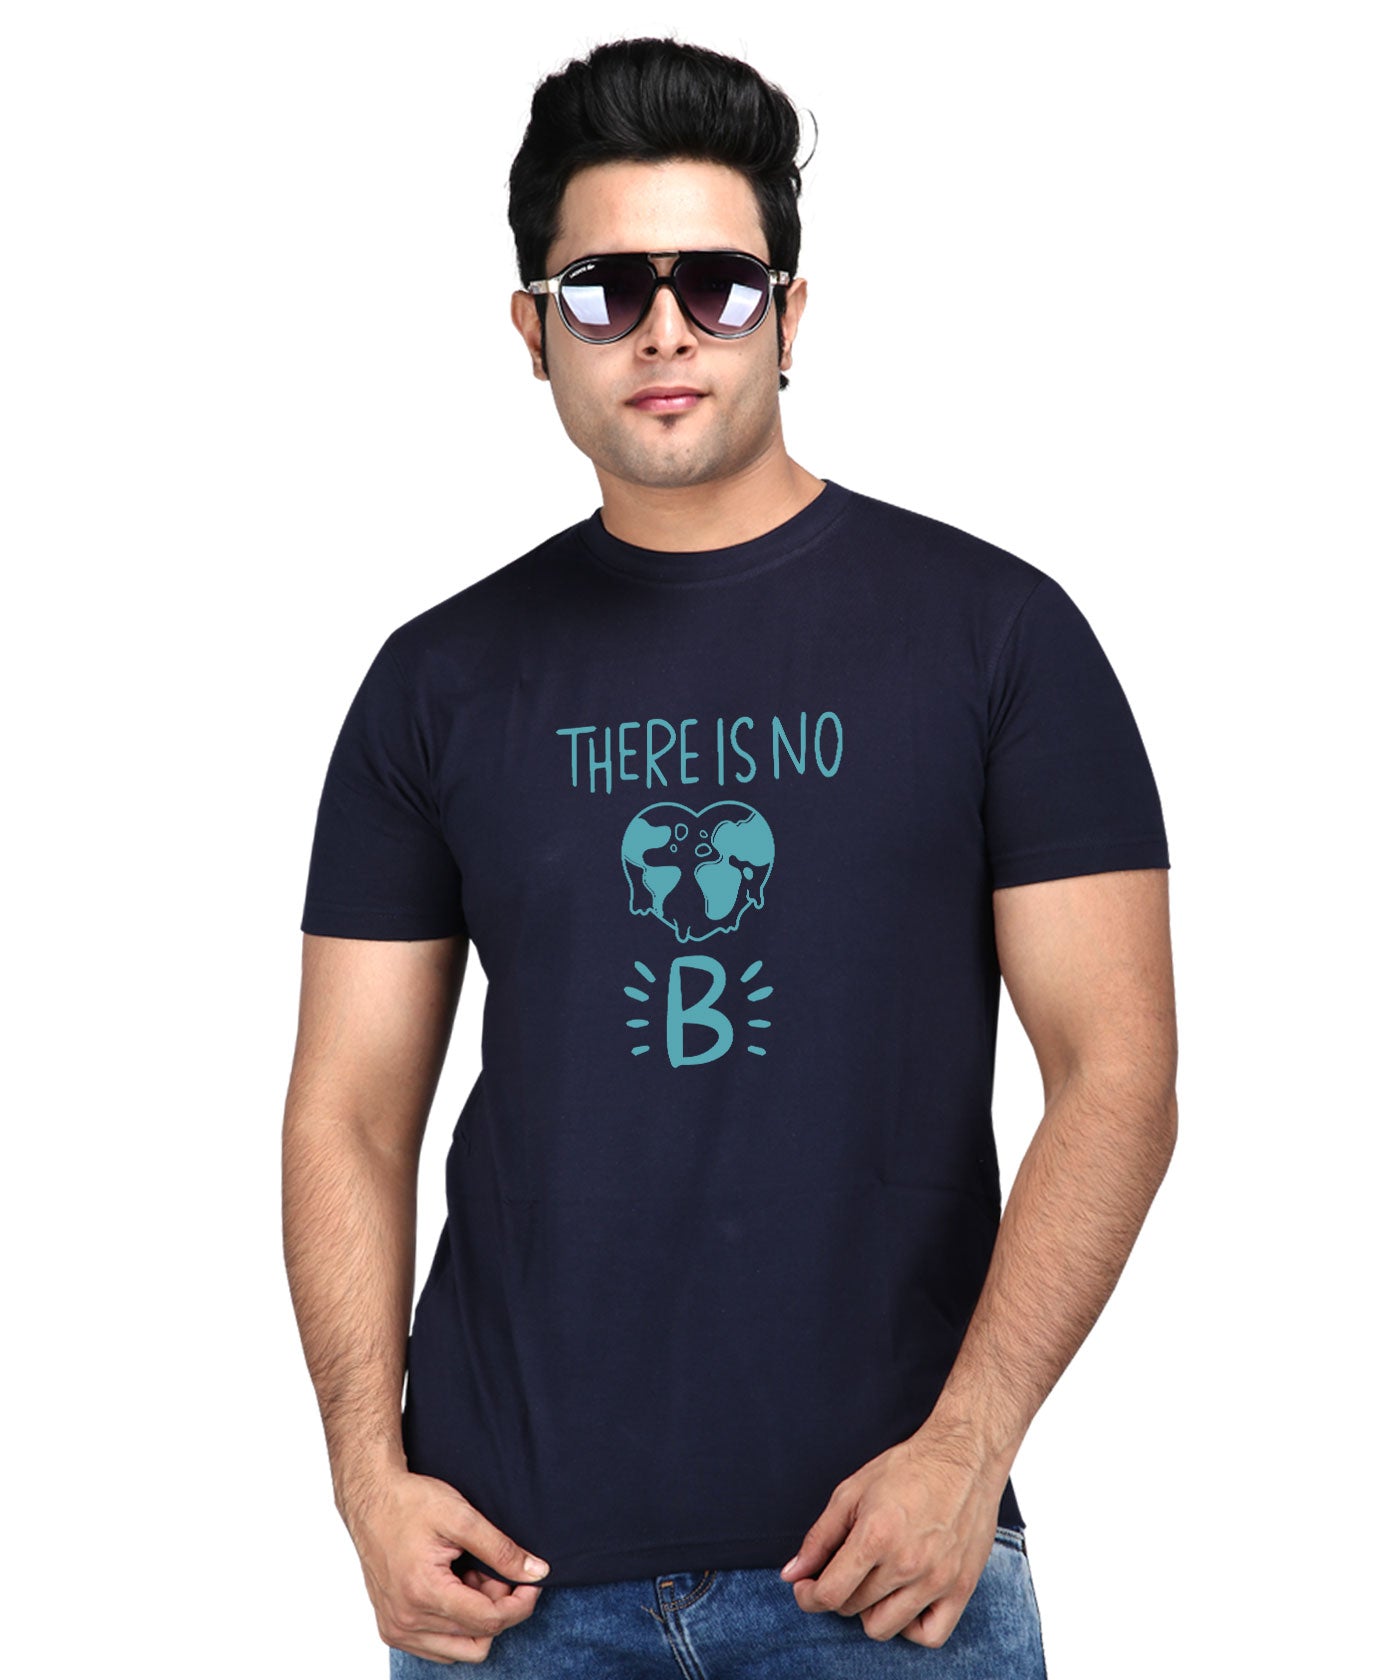 There Is No Planet B - Premium Round Neck Cotton Tees for Men - Navy Blue